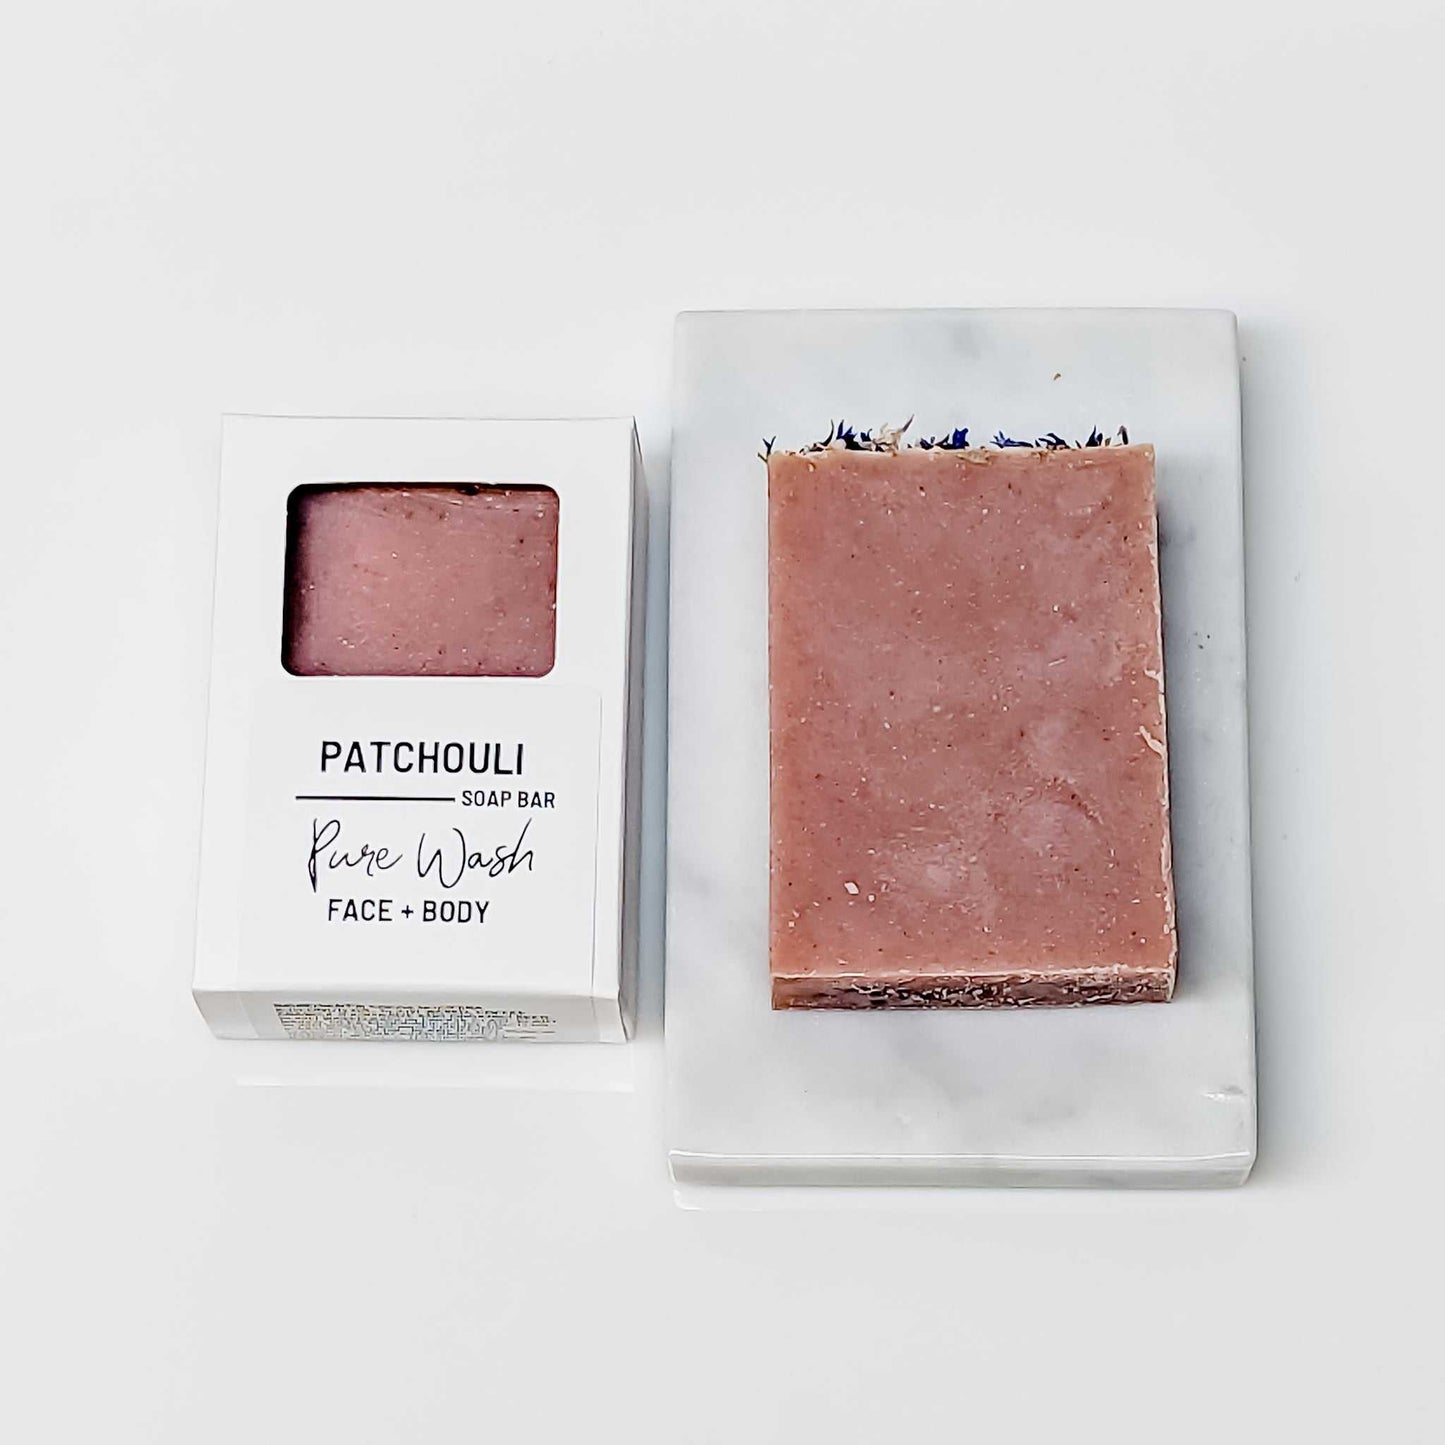 Premium Patchouli soap bar for an exotic earthy scent | CG Pure Wash